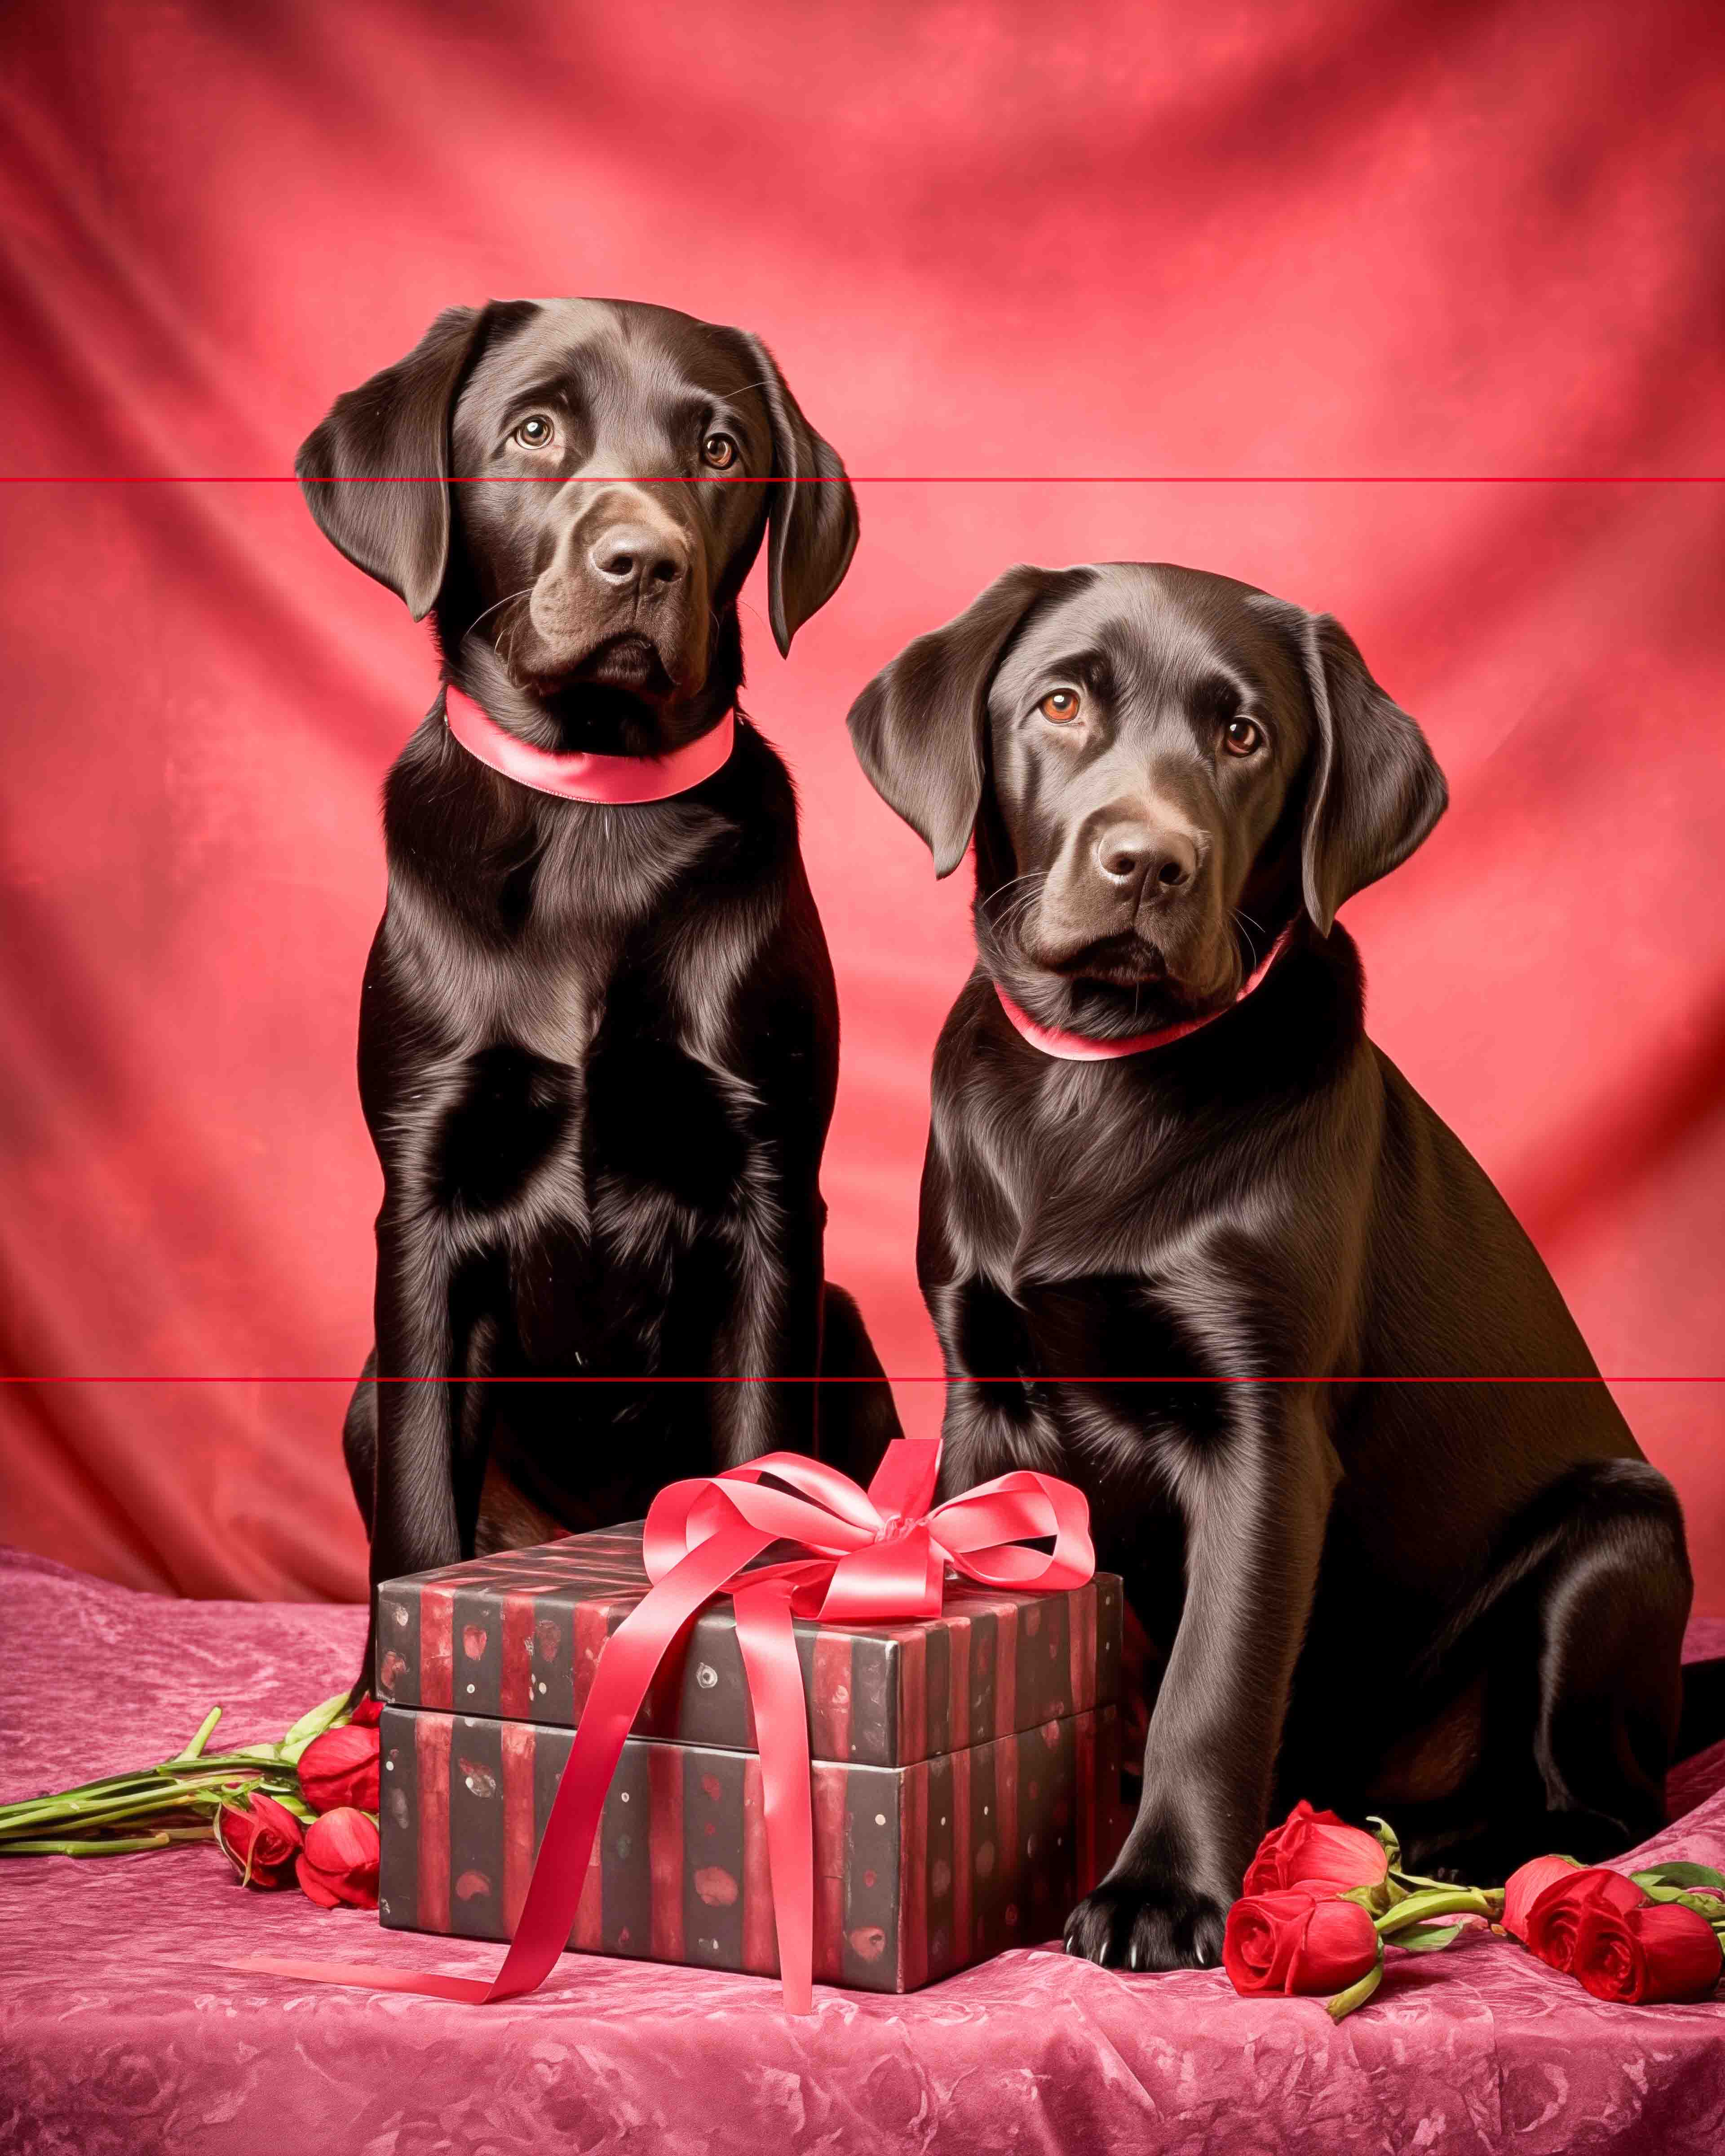 2 black or brown Labrador Retrievers guard a giftwrapped box with pink bow and red roses strewn about, against a rose colored drape